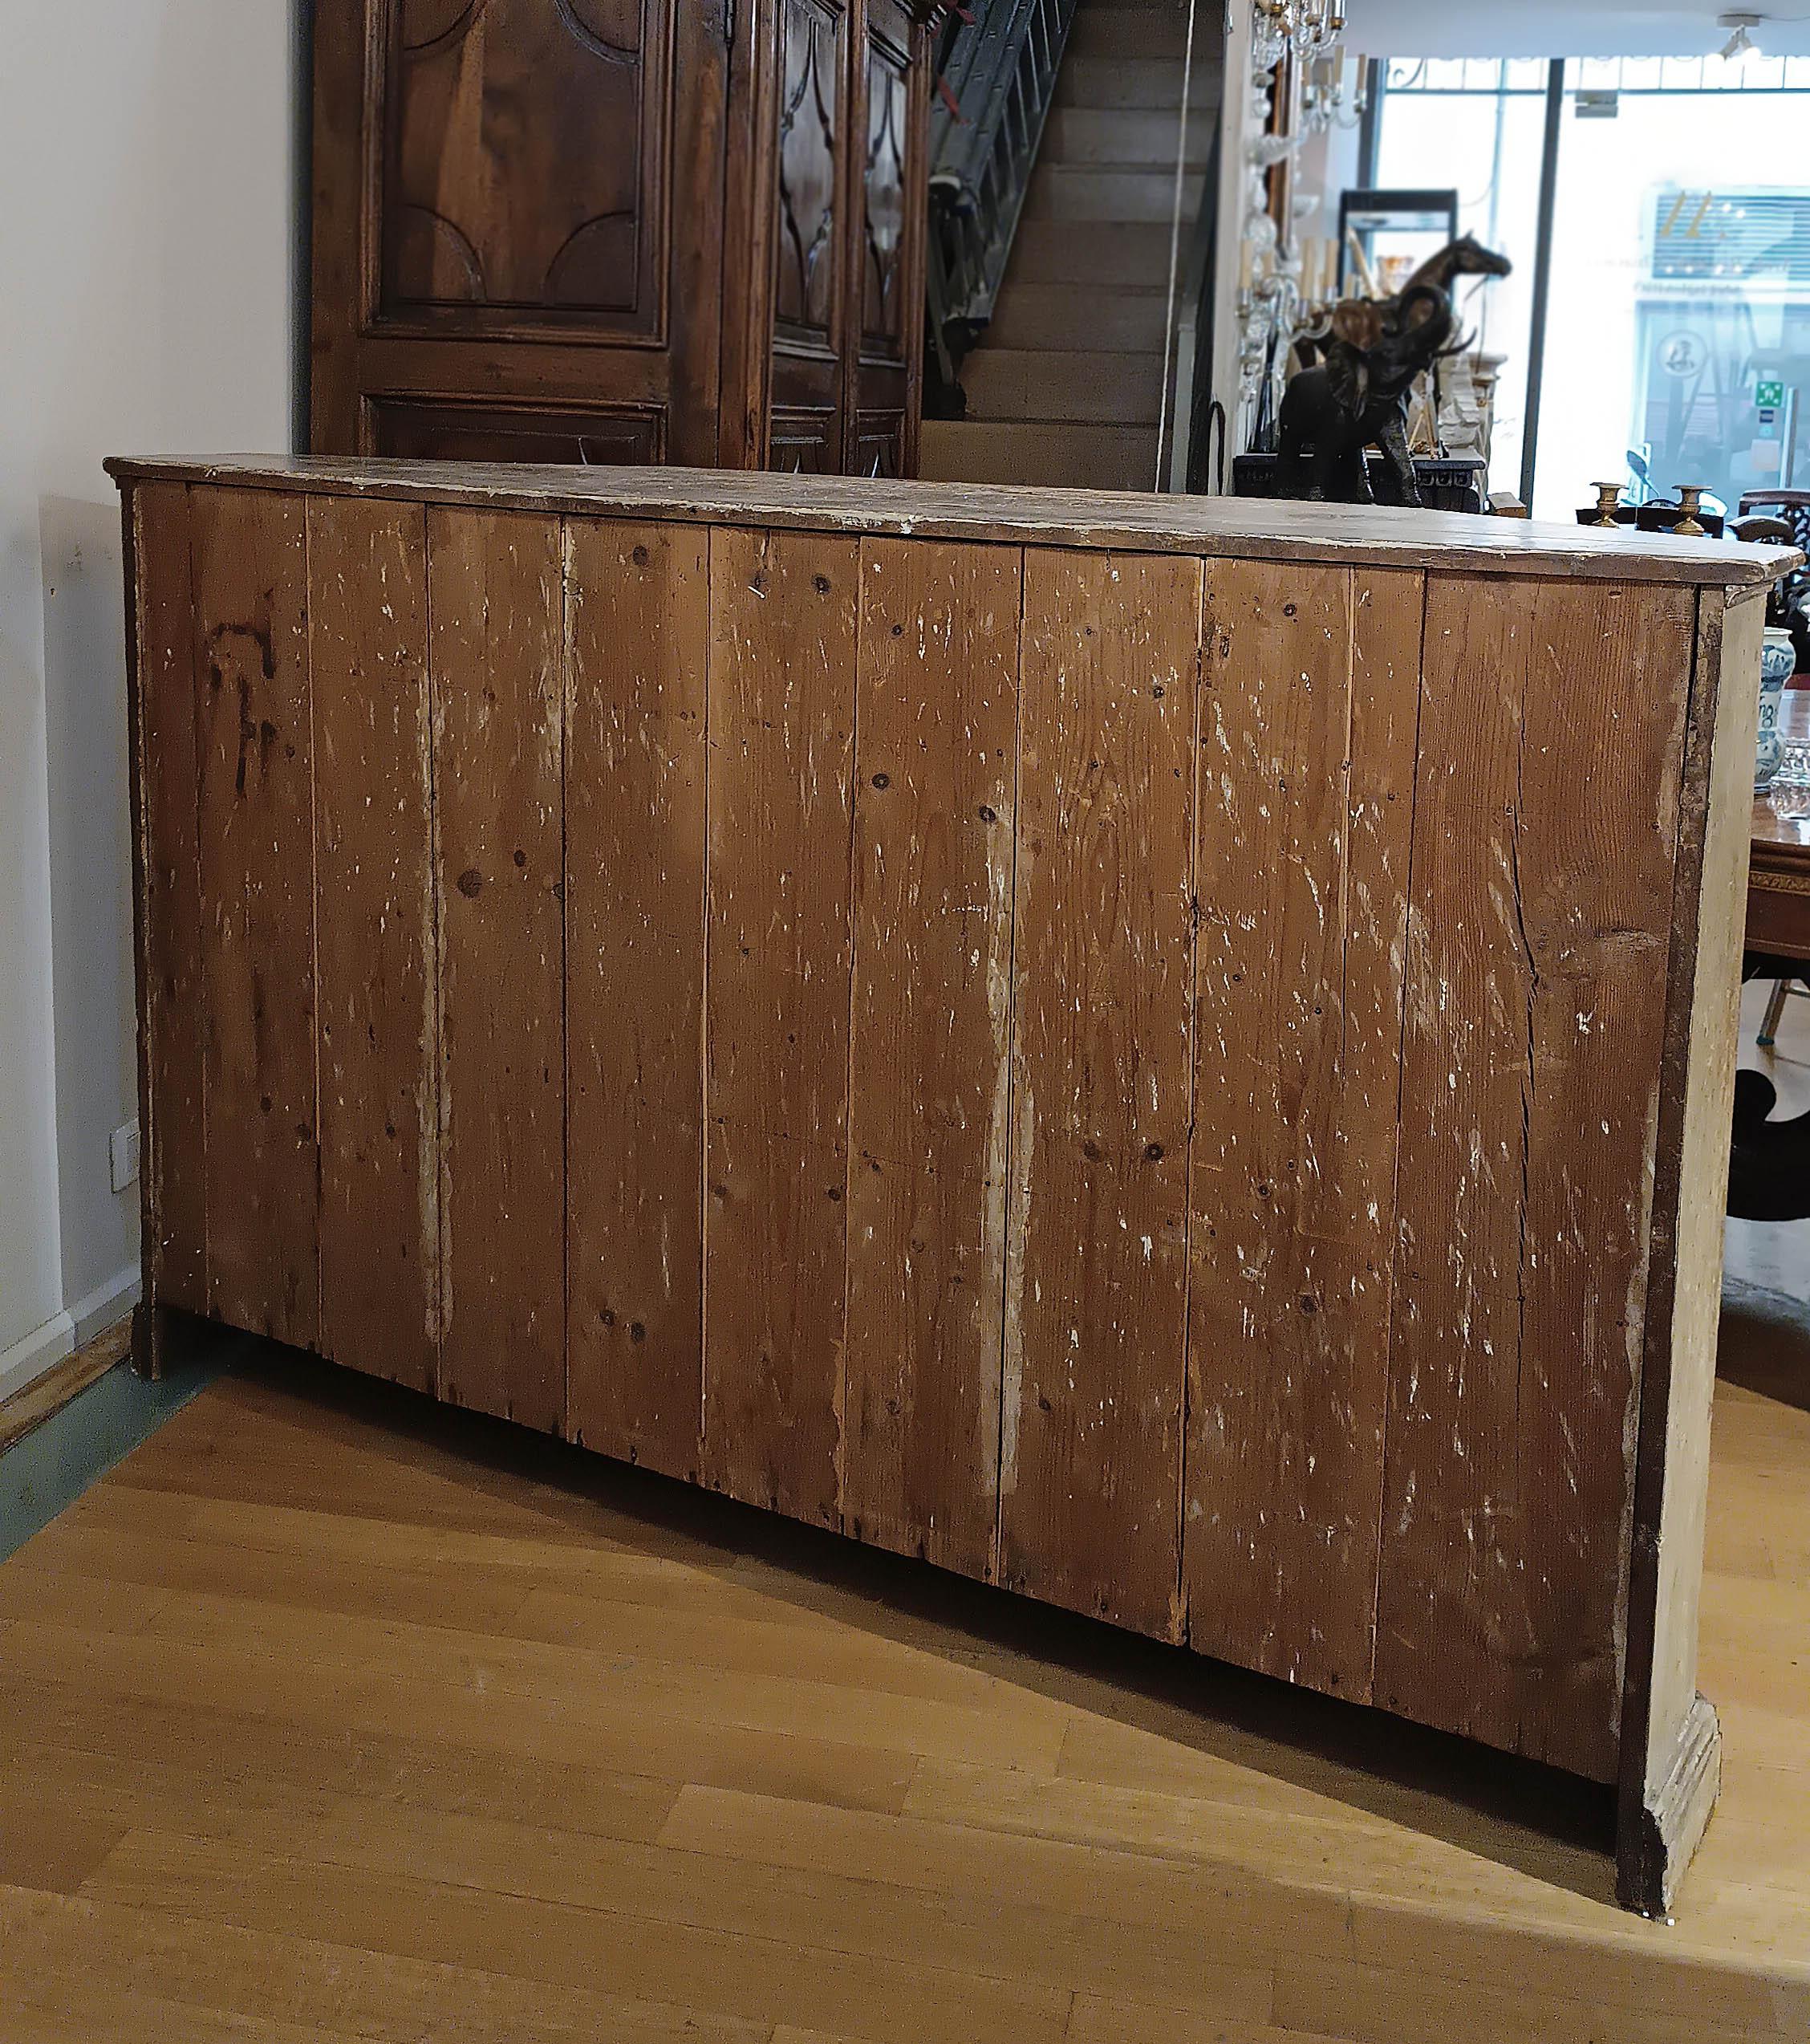 Nutwood END OF THE 18th CENTURY NEOCLASSICAL SIDEBOARD IN PAINTED WALNUT